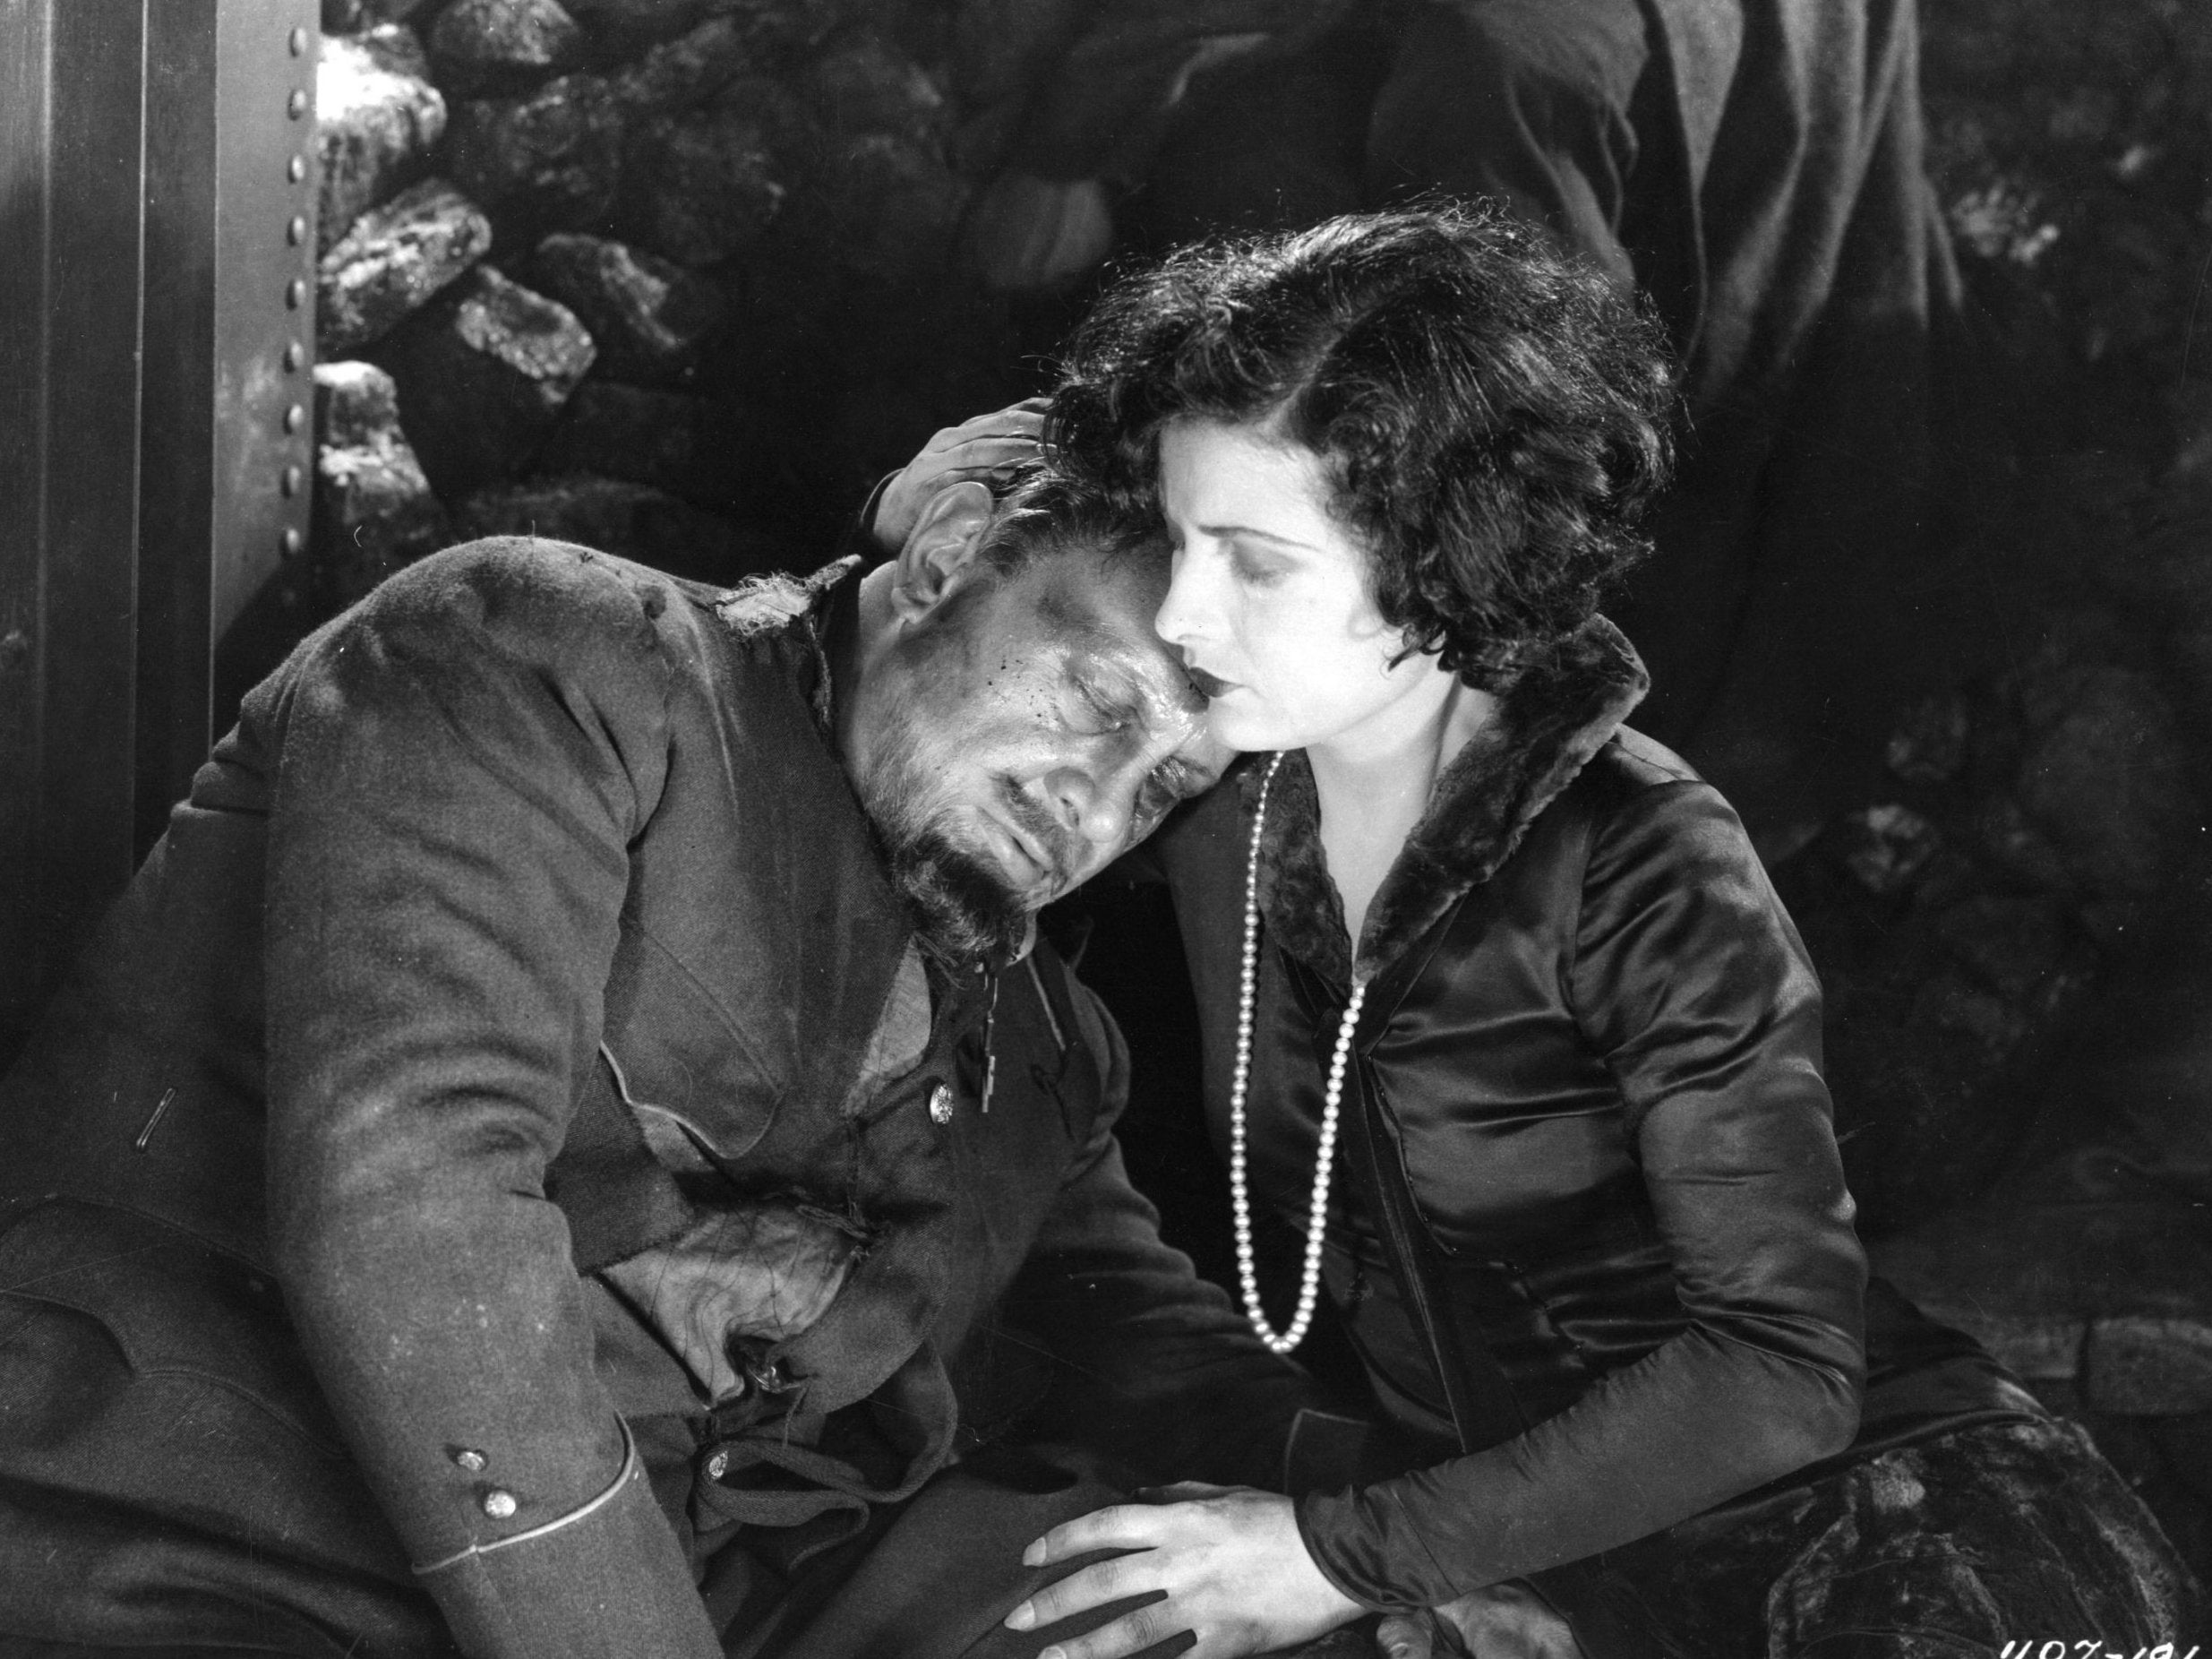 Emil Jannings and Evelyn Brent in the Josef Von Sternberg's 'The Last Command'